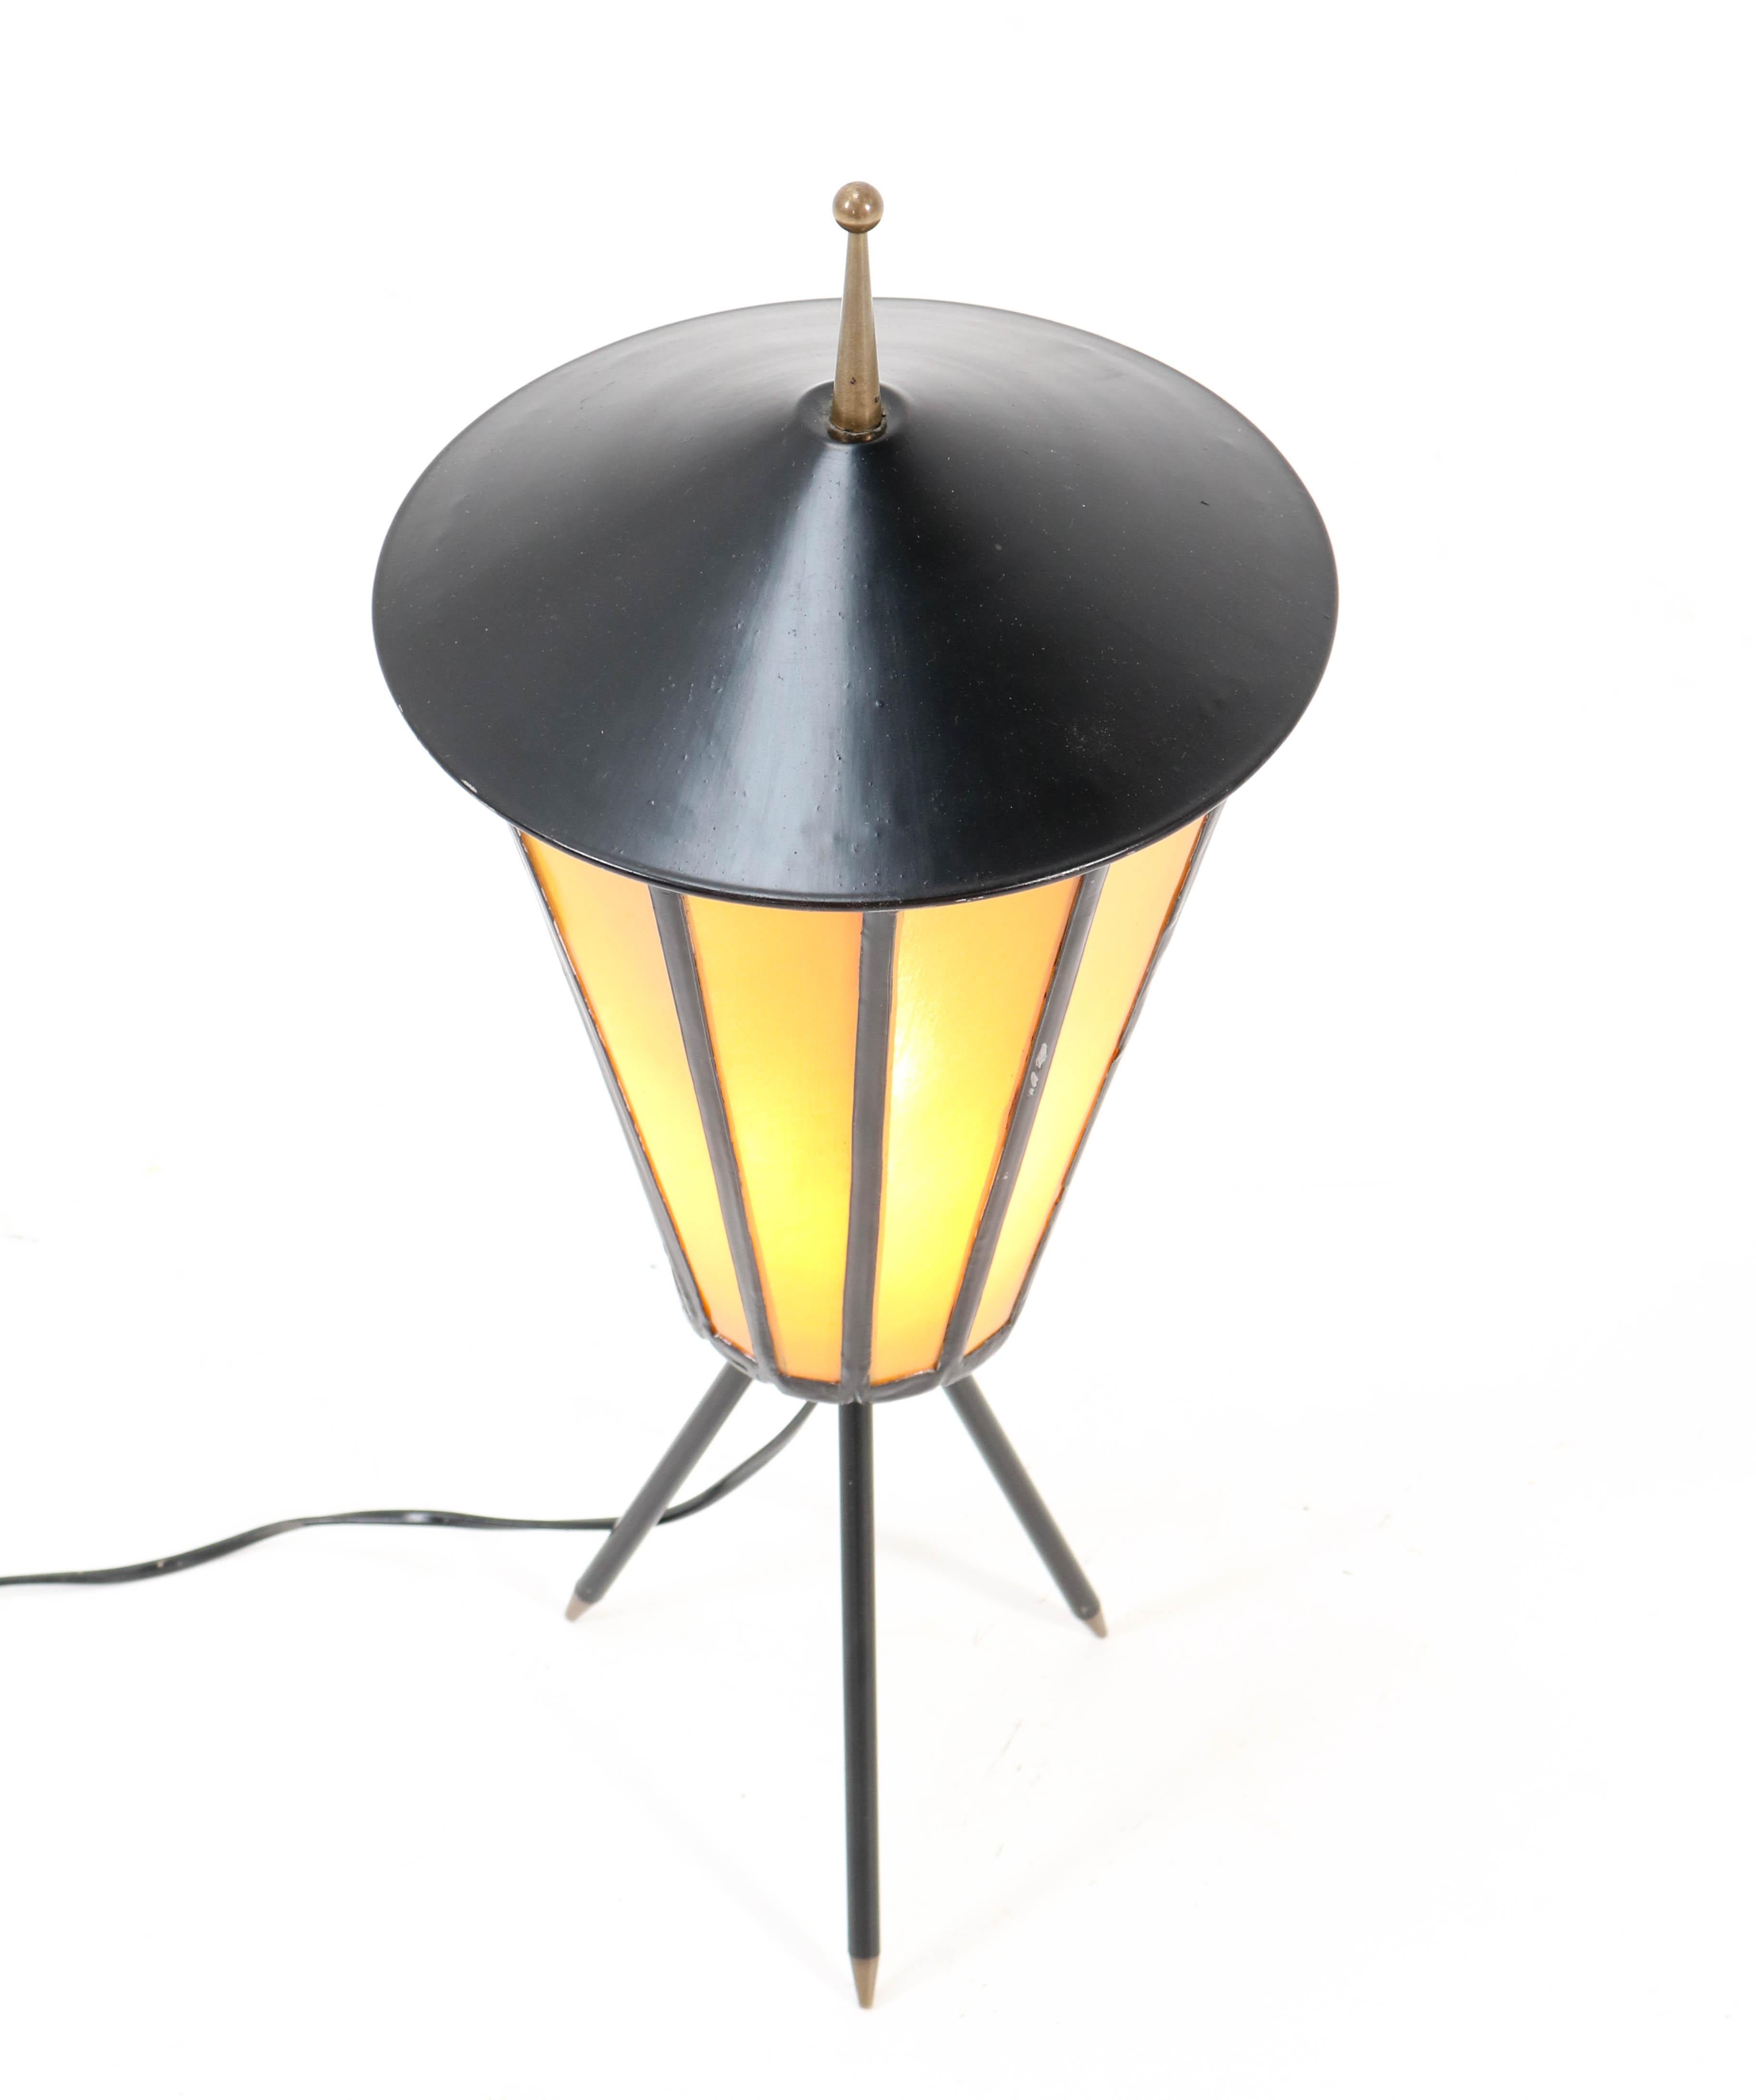 Lacquered French Mid-Century Modern Table Lamp, 1950s For Sale